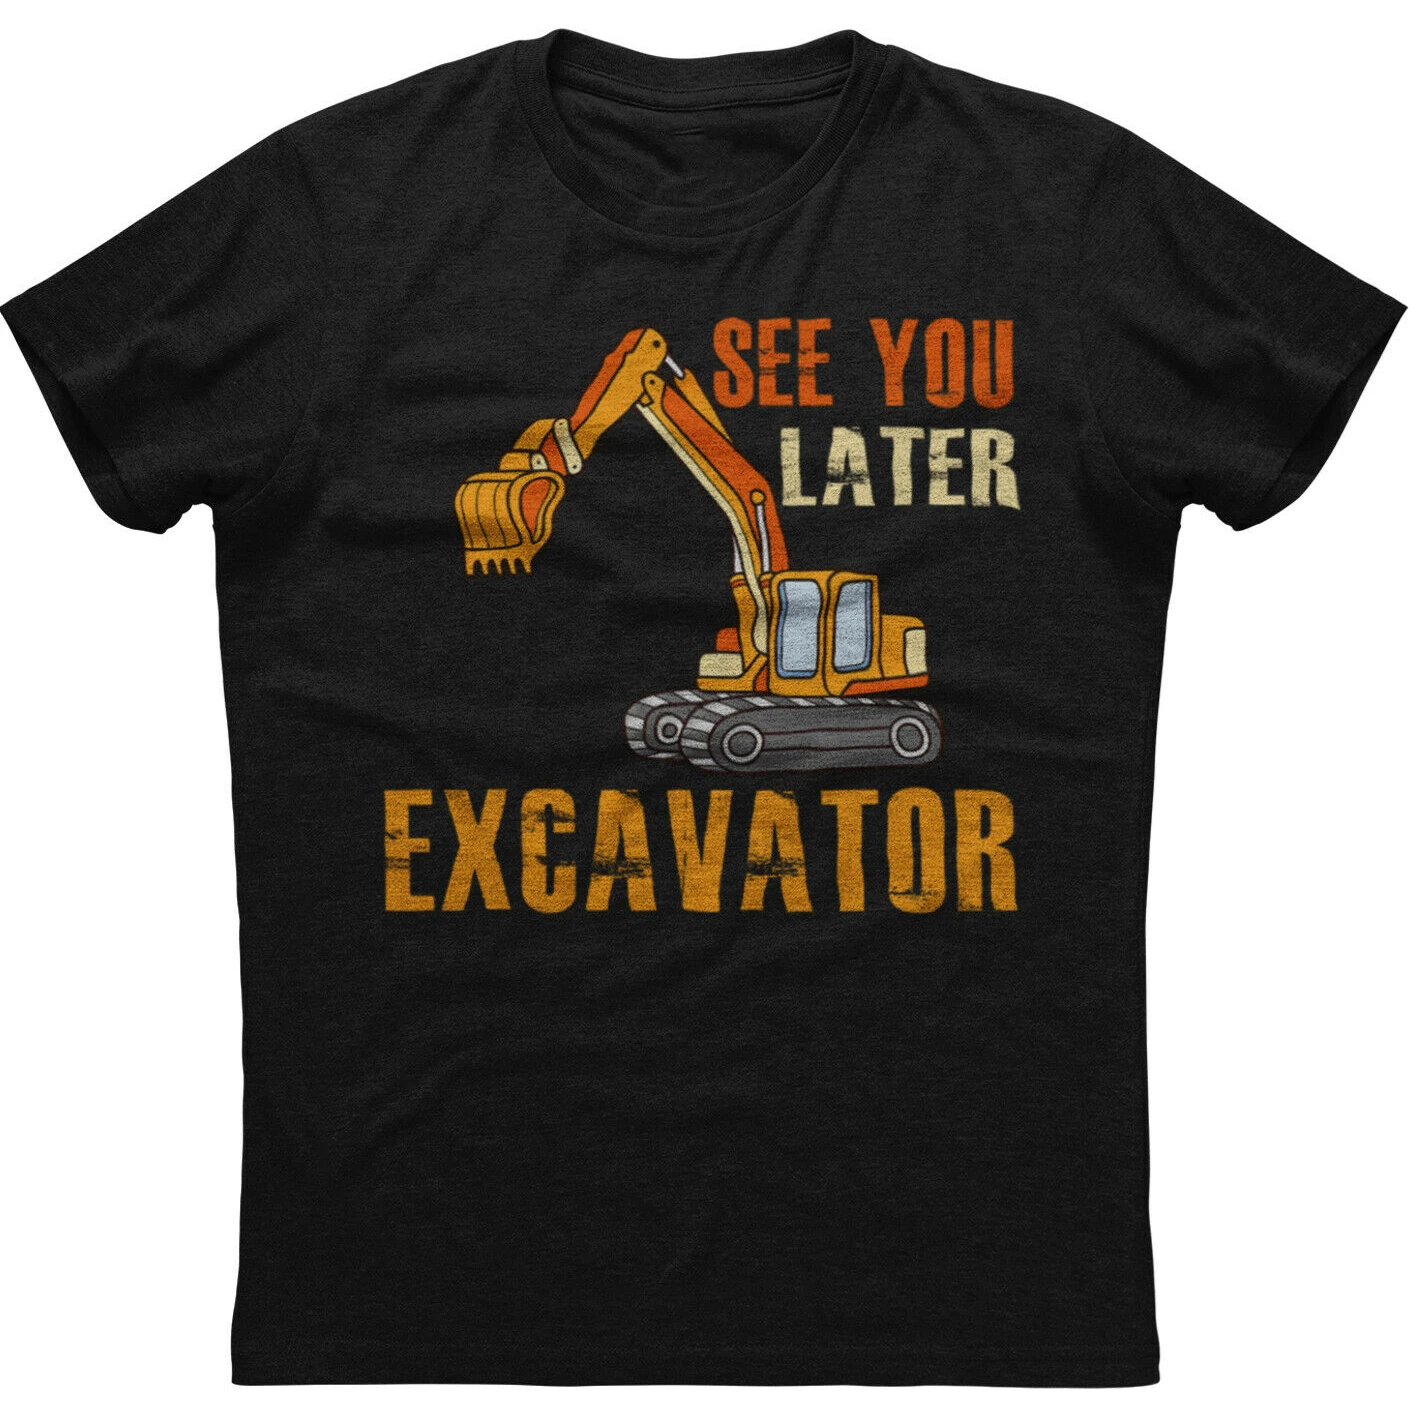 

See You Later Excavator Funny Toddler Mens Short Sleeve Cotton Black T-shirt 100% Cotton Casual T-shirts Loose Top Size S-3XL